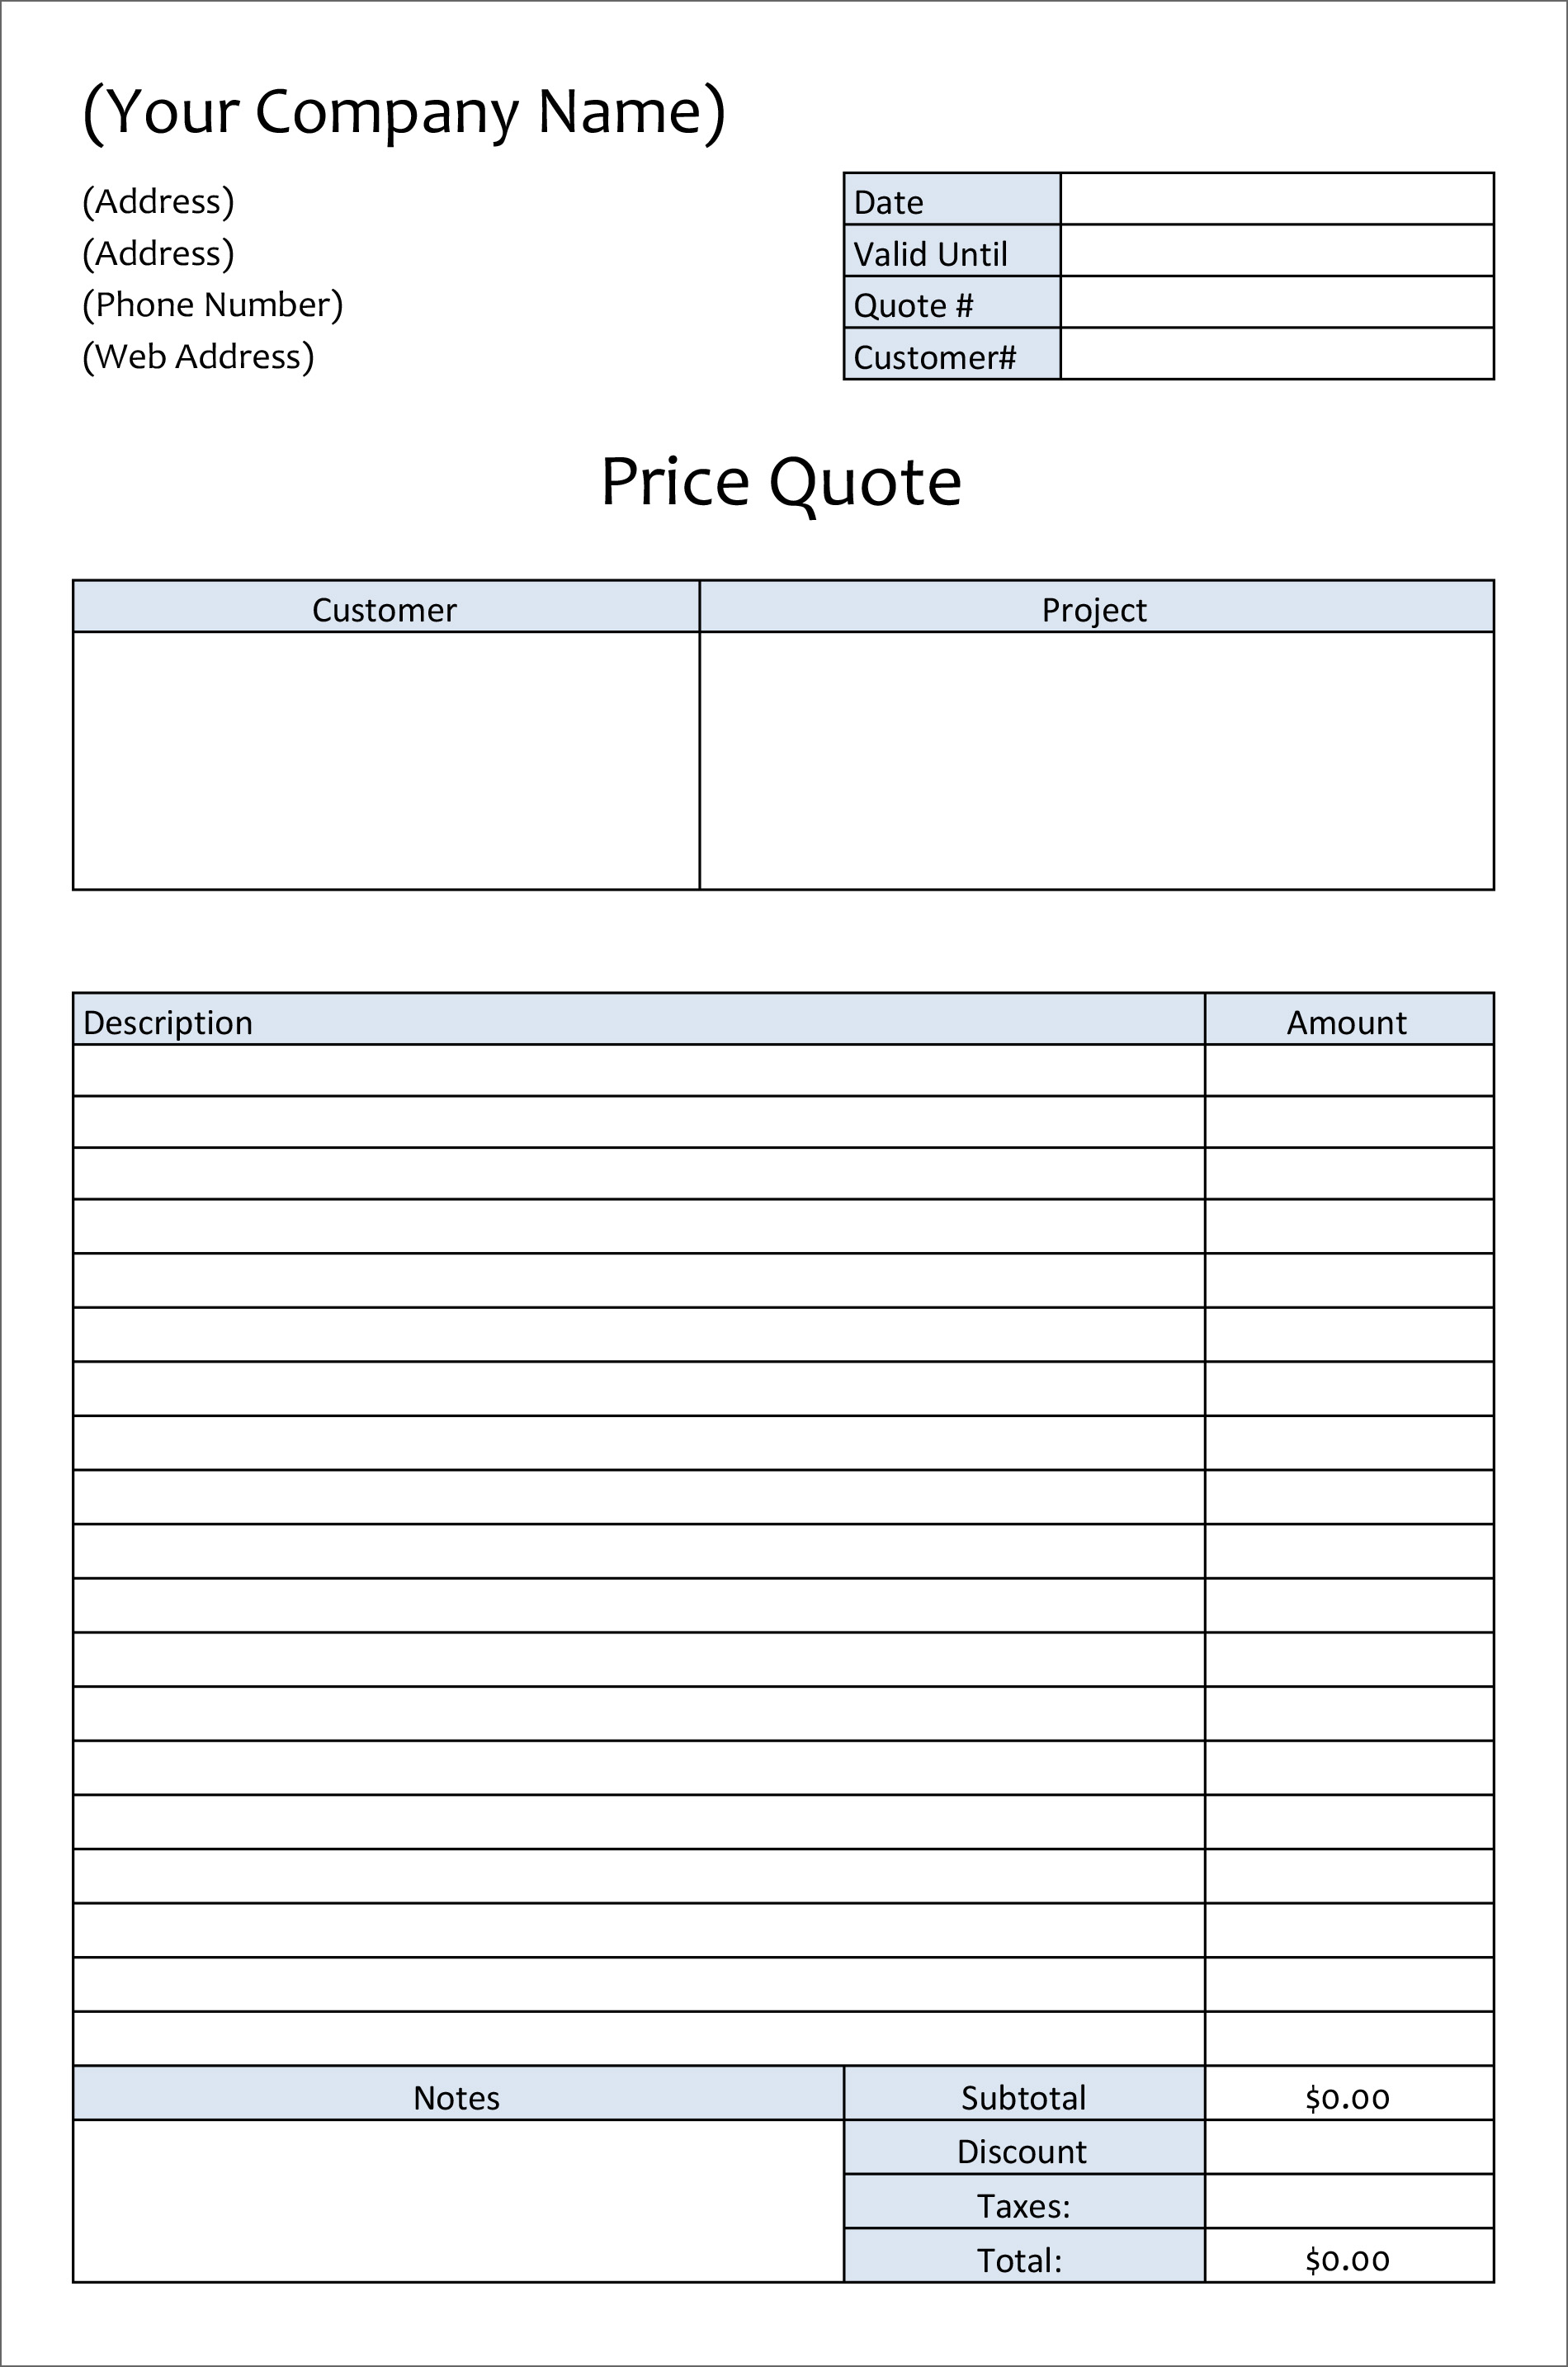 23 Free Templates For Price Estimations, Service Bids, And Sales Quotations